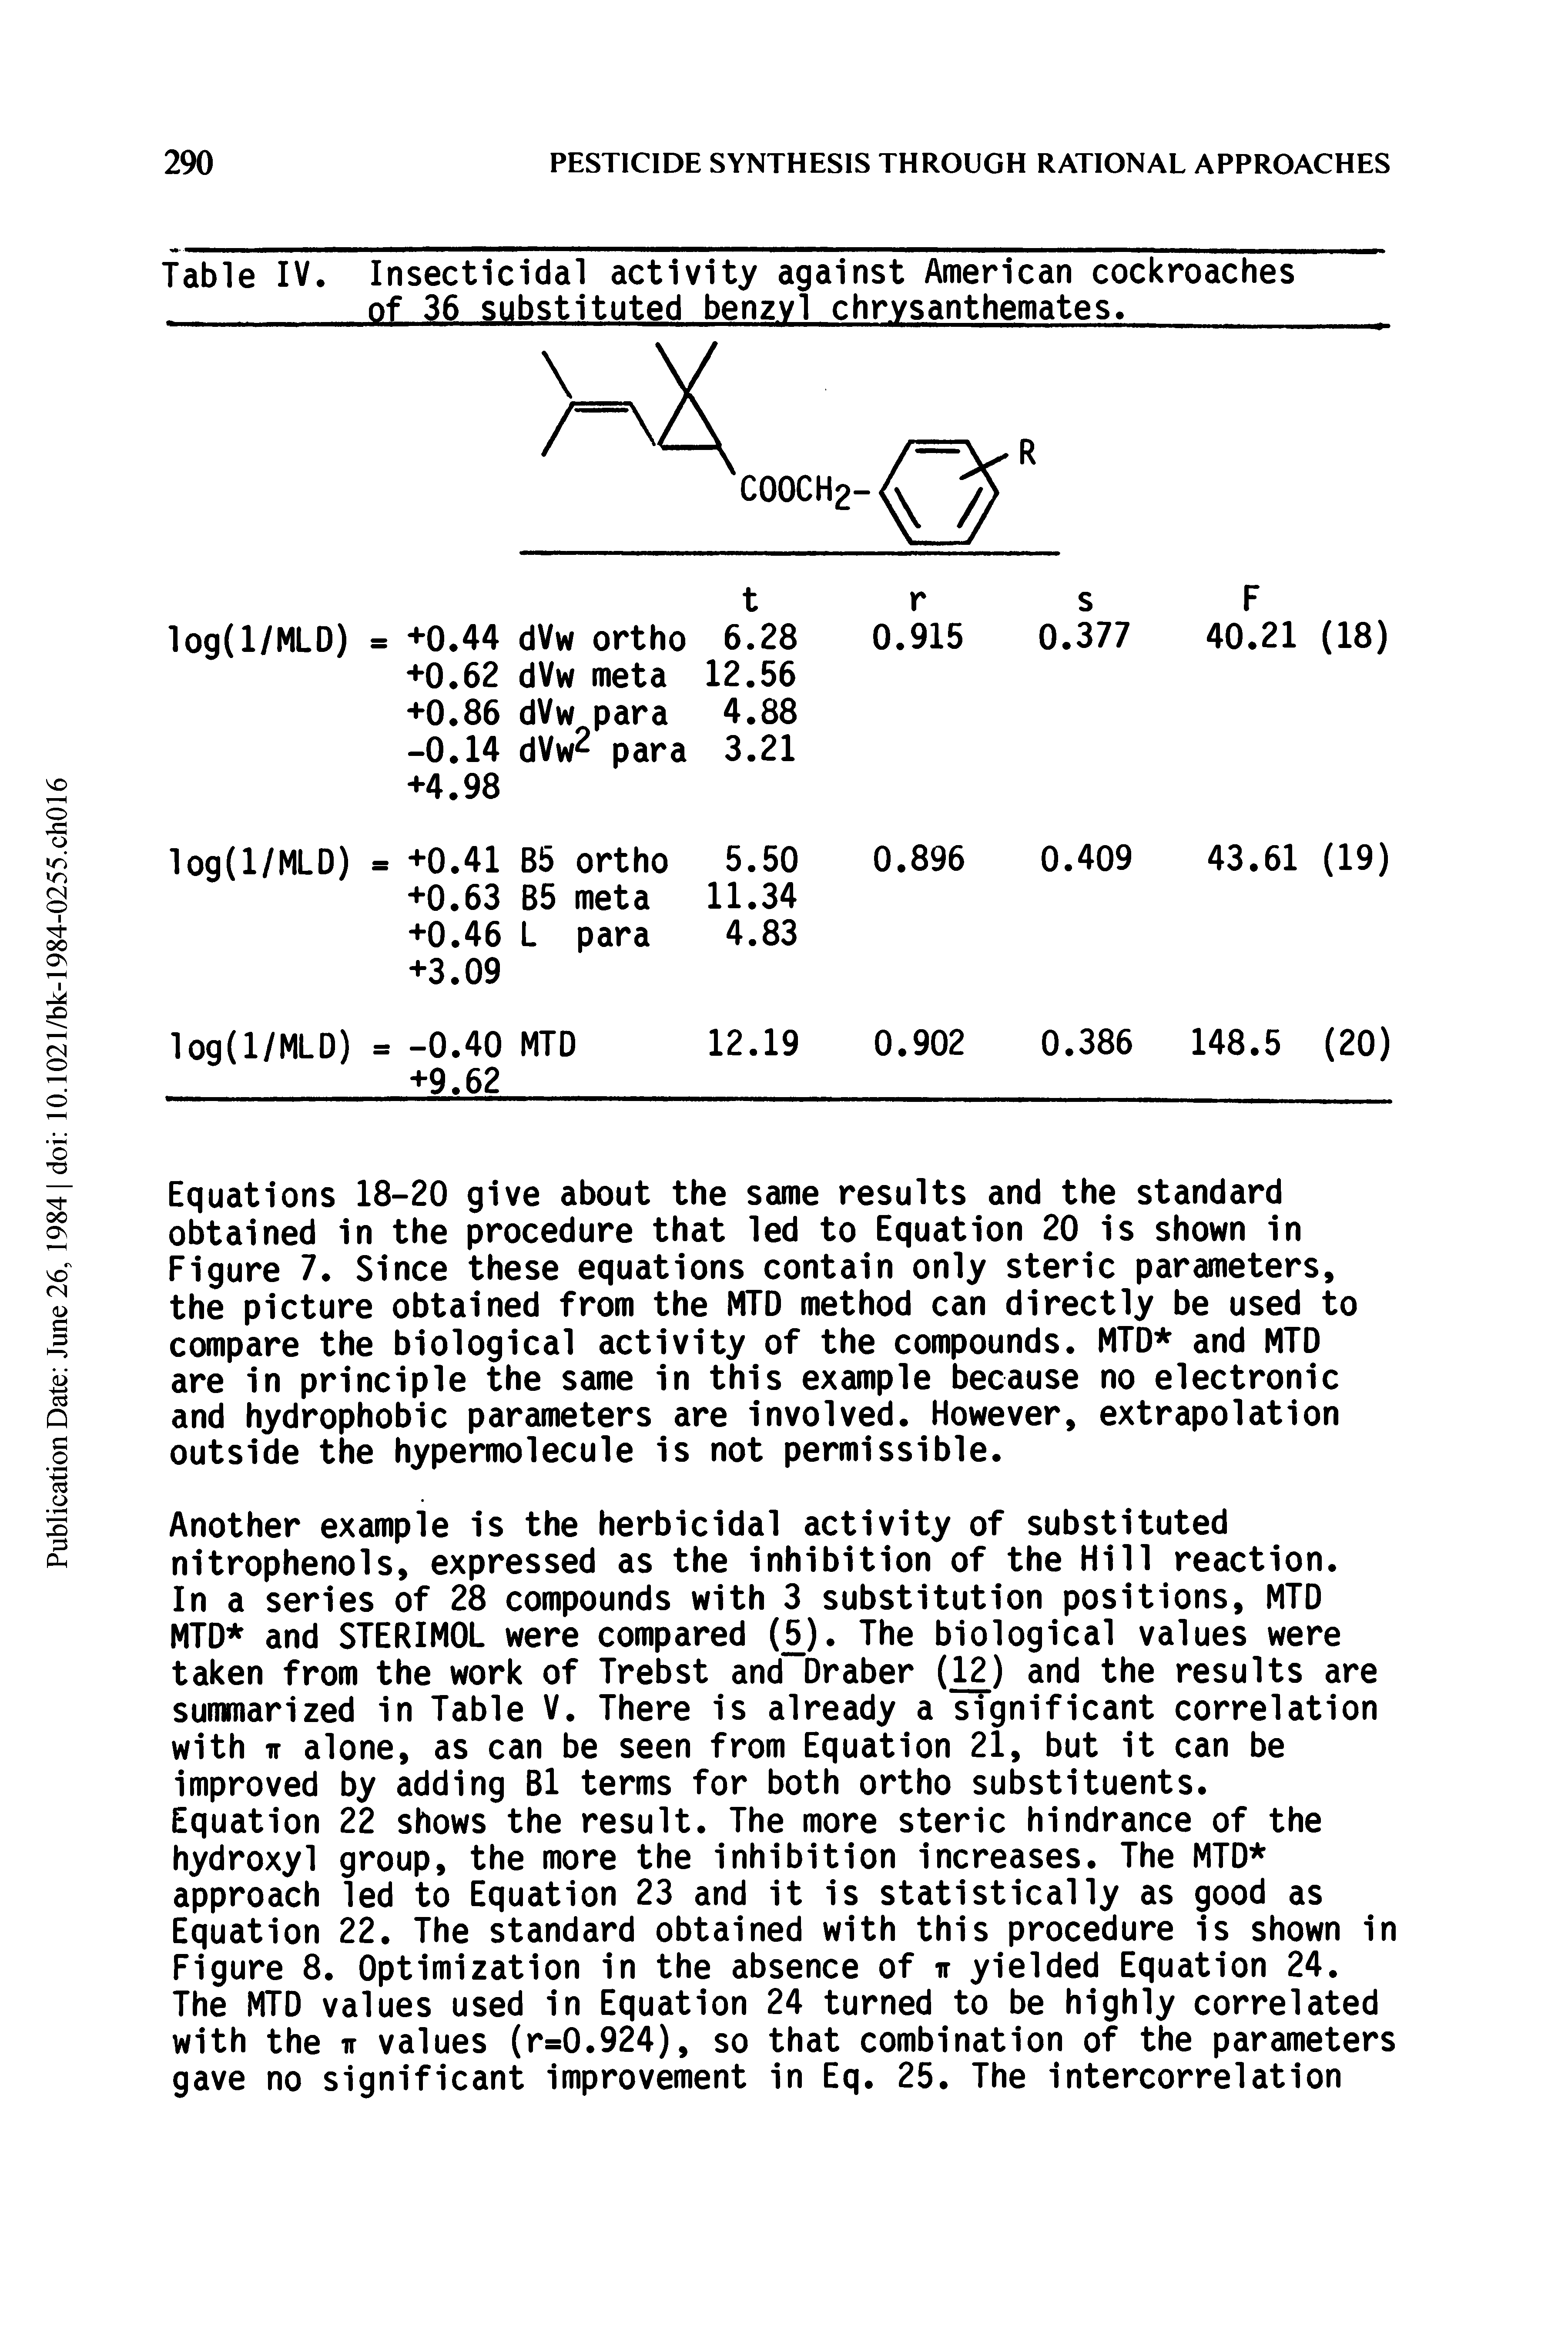 Table IV. Insecticidal activity against American cockroaches of 36 substituted benzvl chrvsanthemates. ...